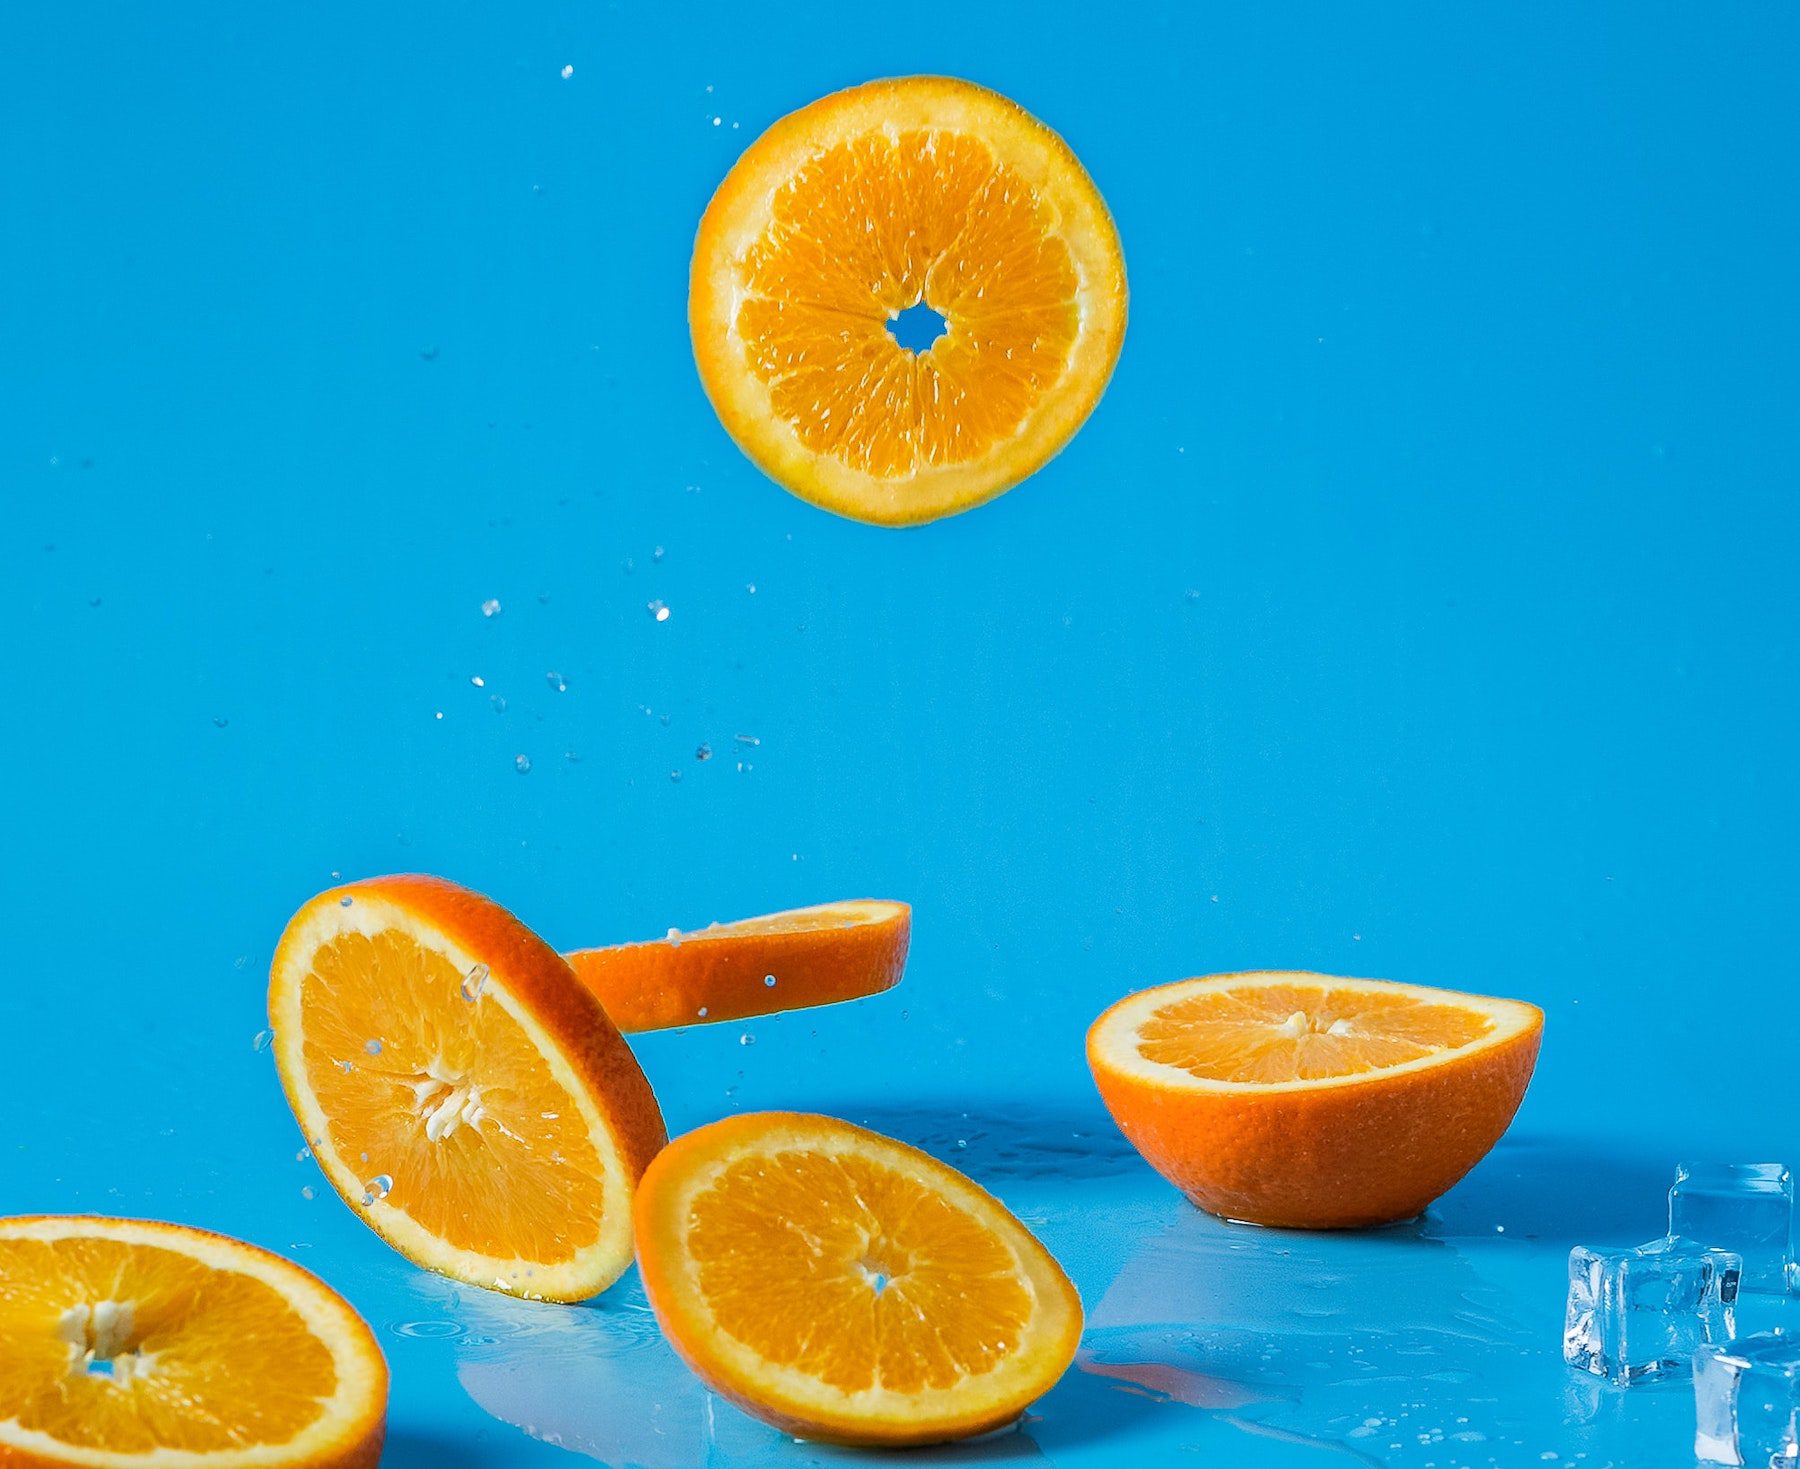 Orange slices against a bright blue background falling and scattering on a blue tabletop.